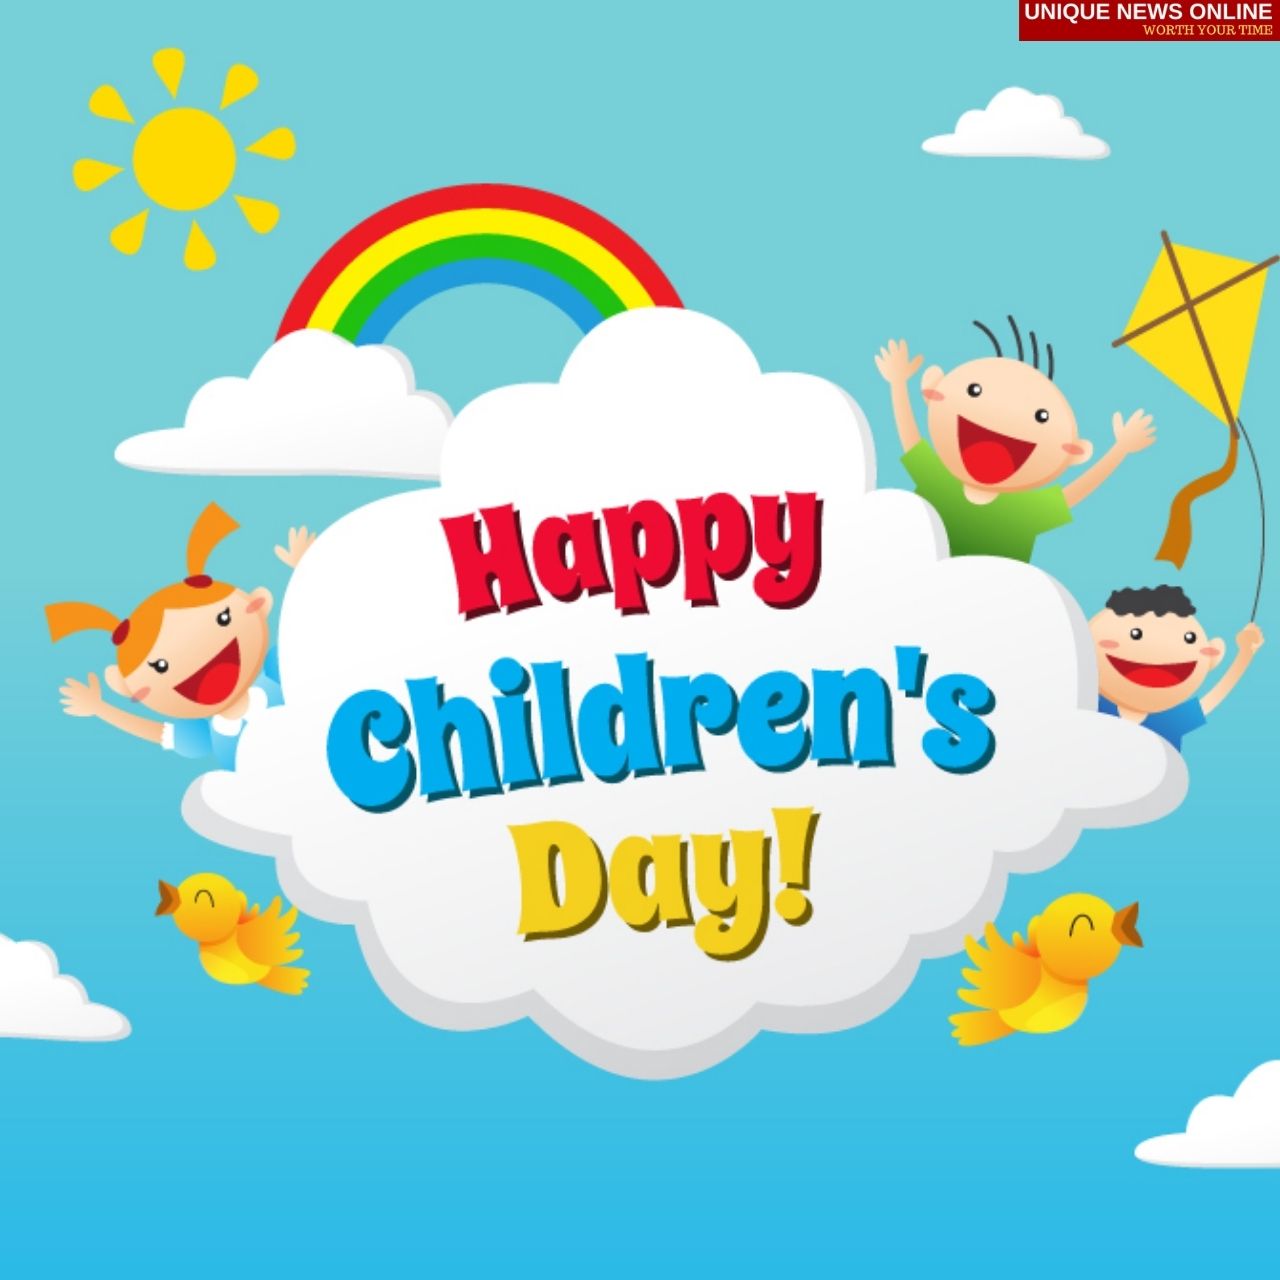 Happy Children's Day 2021 Quotes, HD Images, Greetings, Wishes, and Messages for Friends